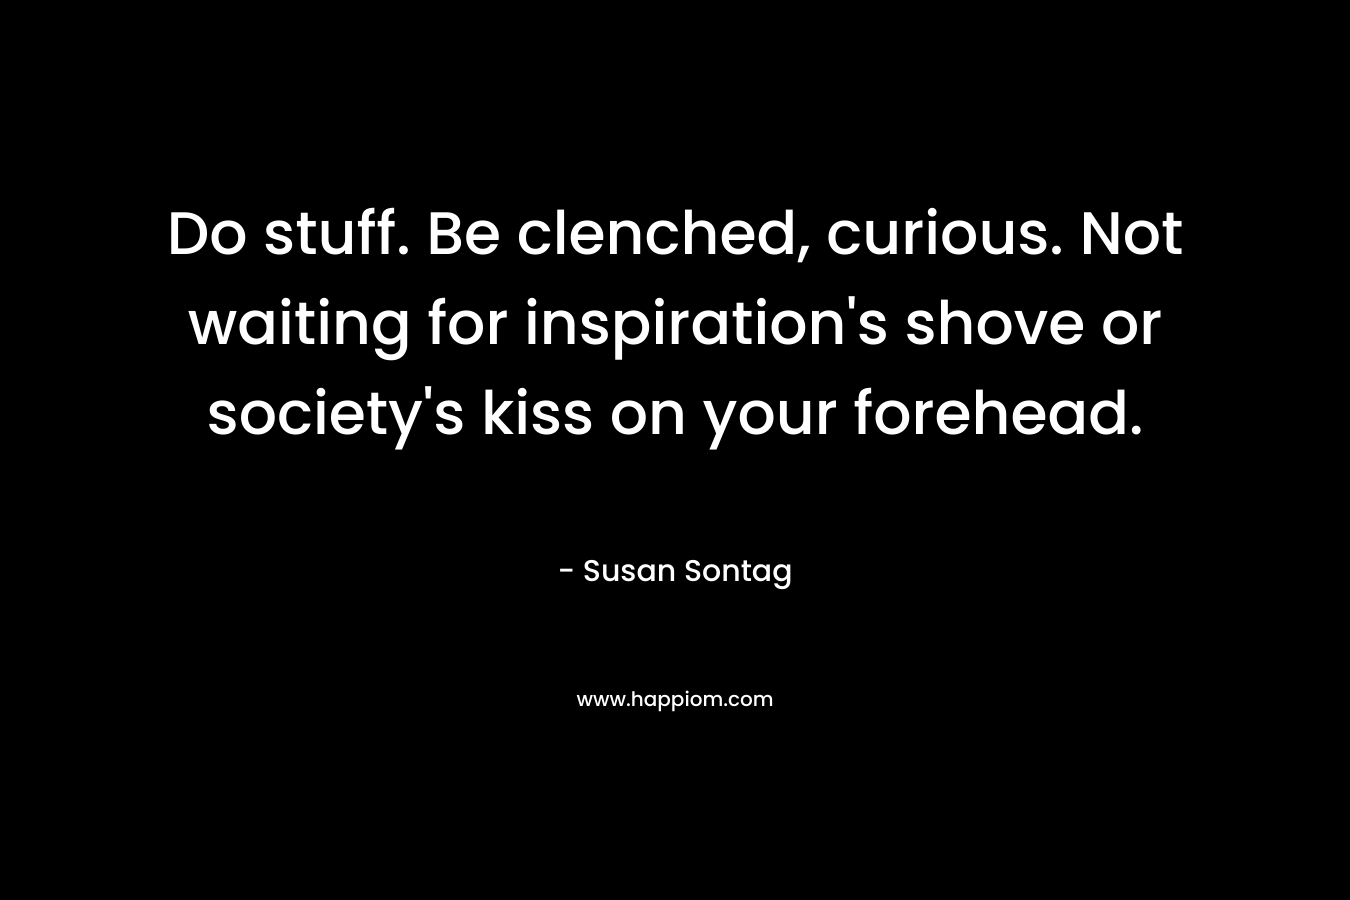 Do stuff. Be clenched, curious. Not waiting for inspiration’s shove or society’s kiss on your forehead. – Susan Sontag